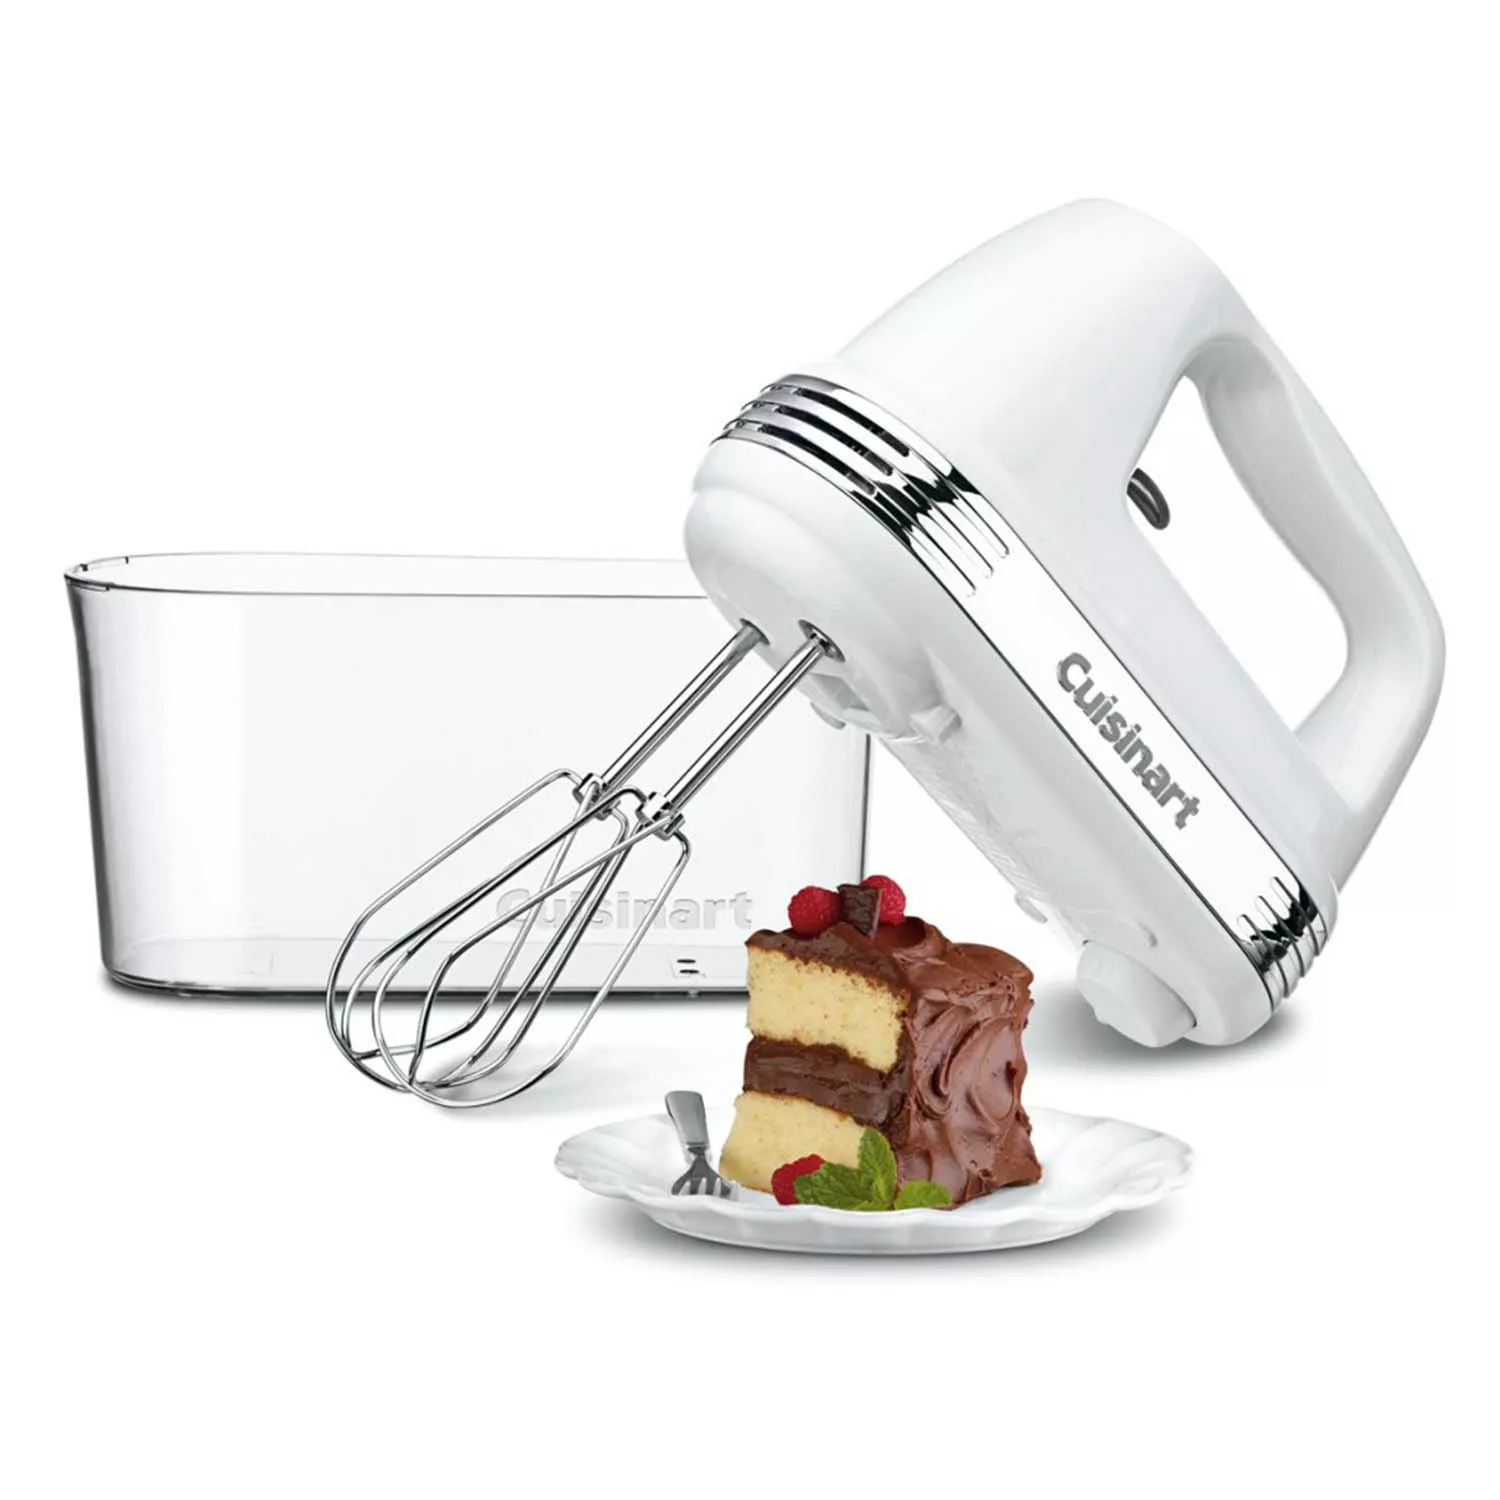 Power Advantage® Deluxe 8-Speed Hand Mixer with Blending Attachment 